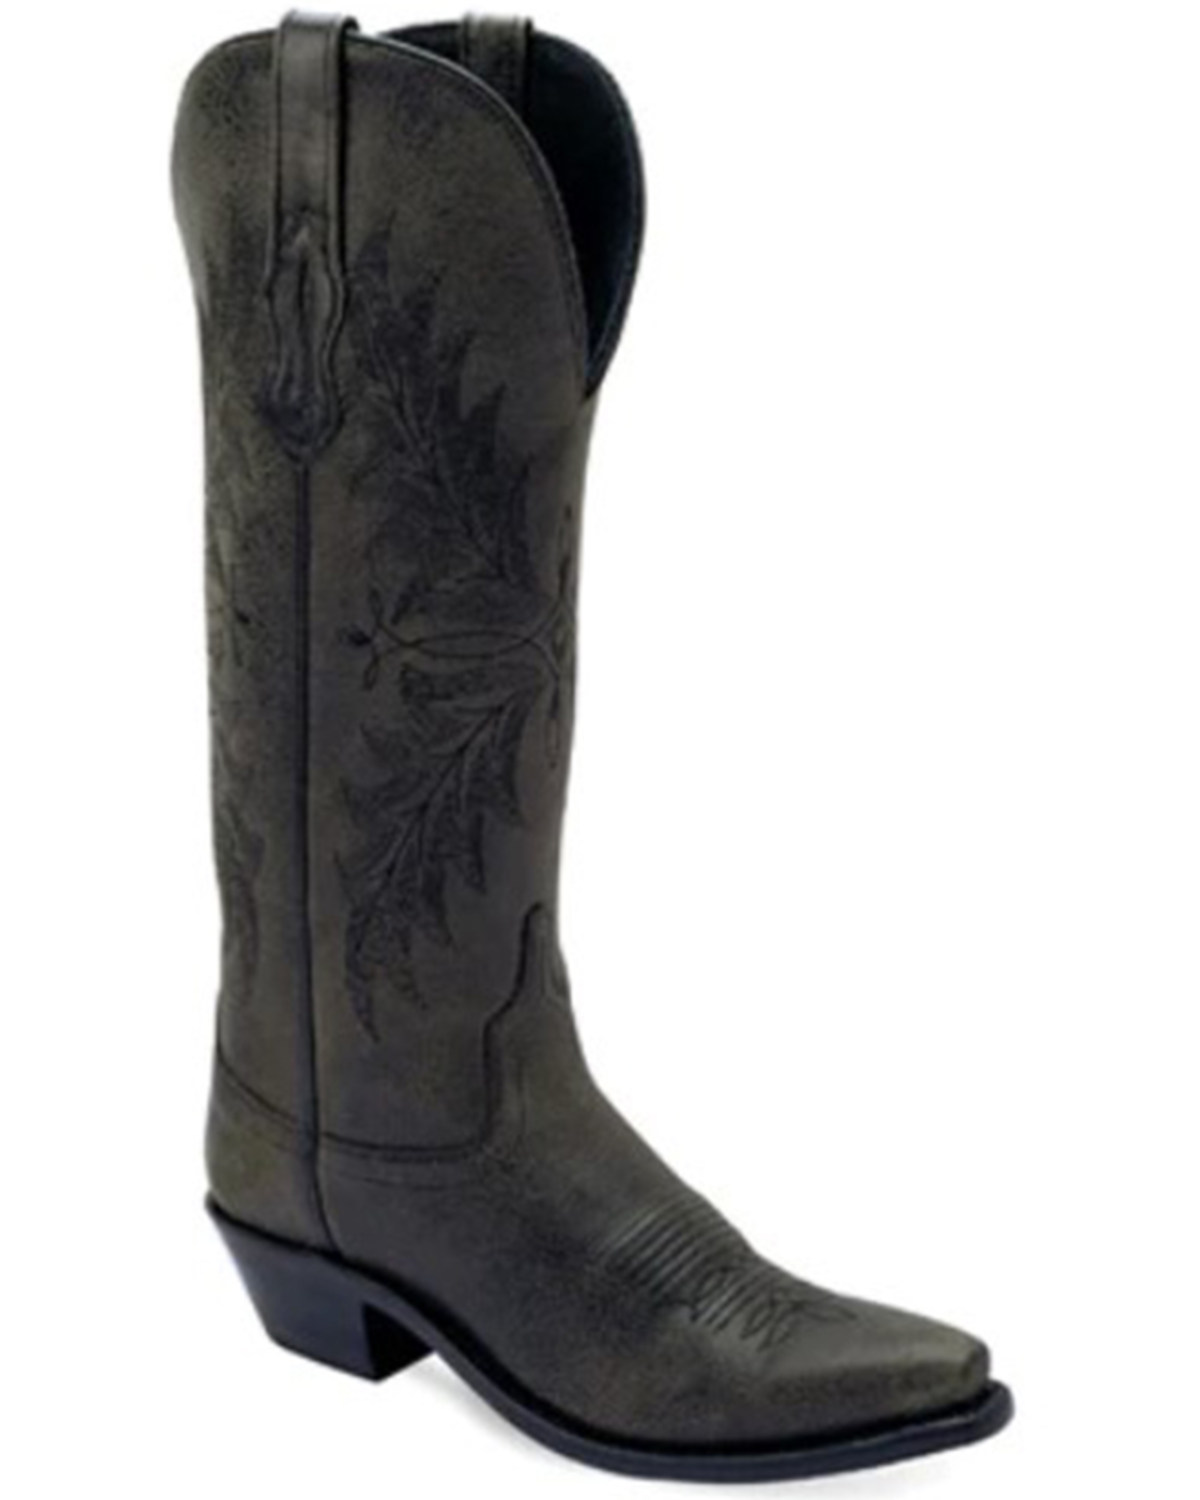 Old West Women's Tall Western Boots - Snip Toe